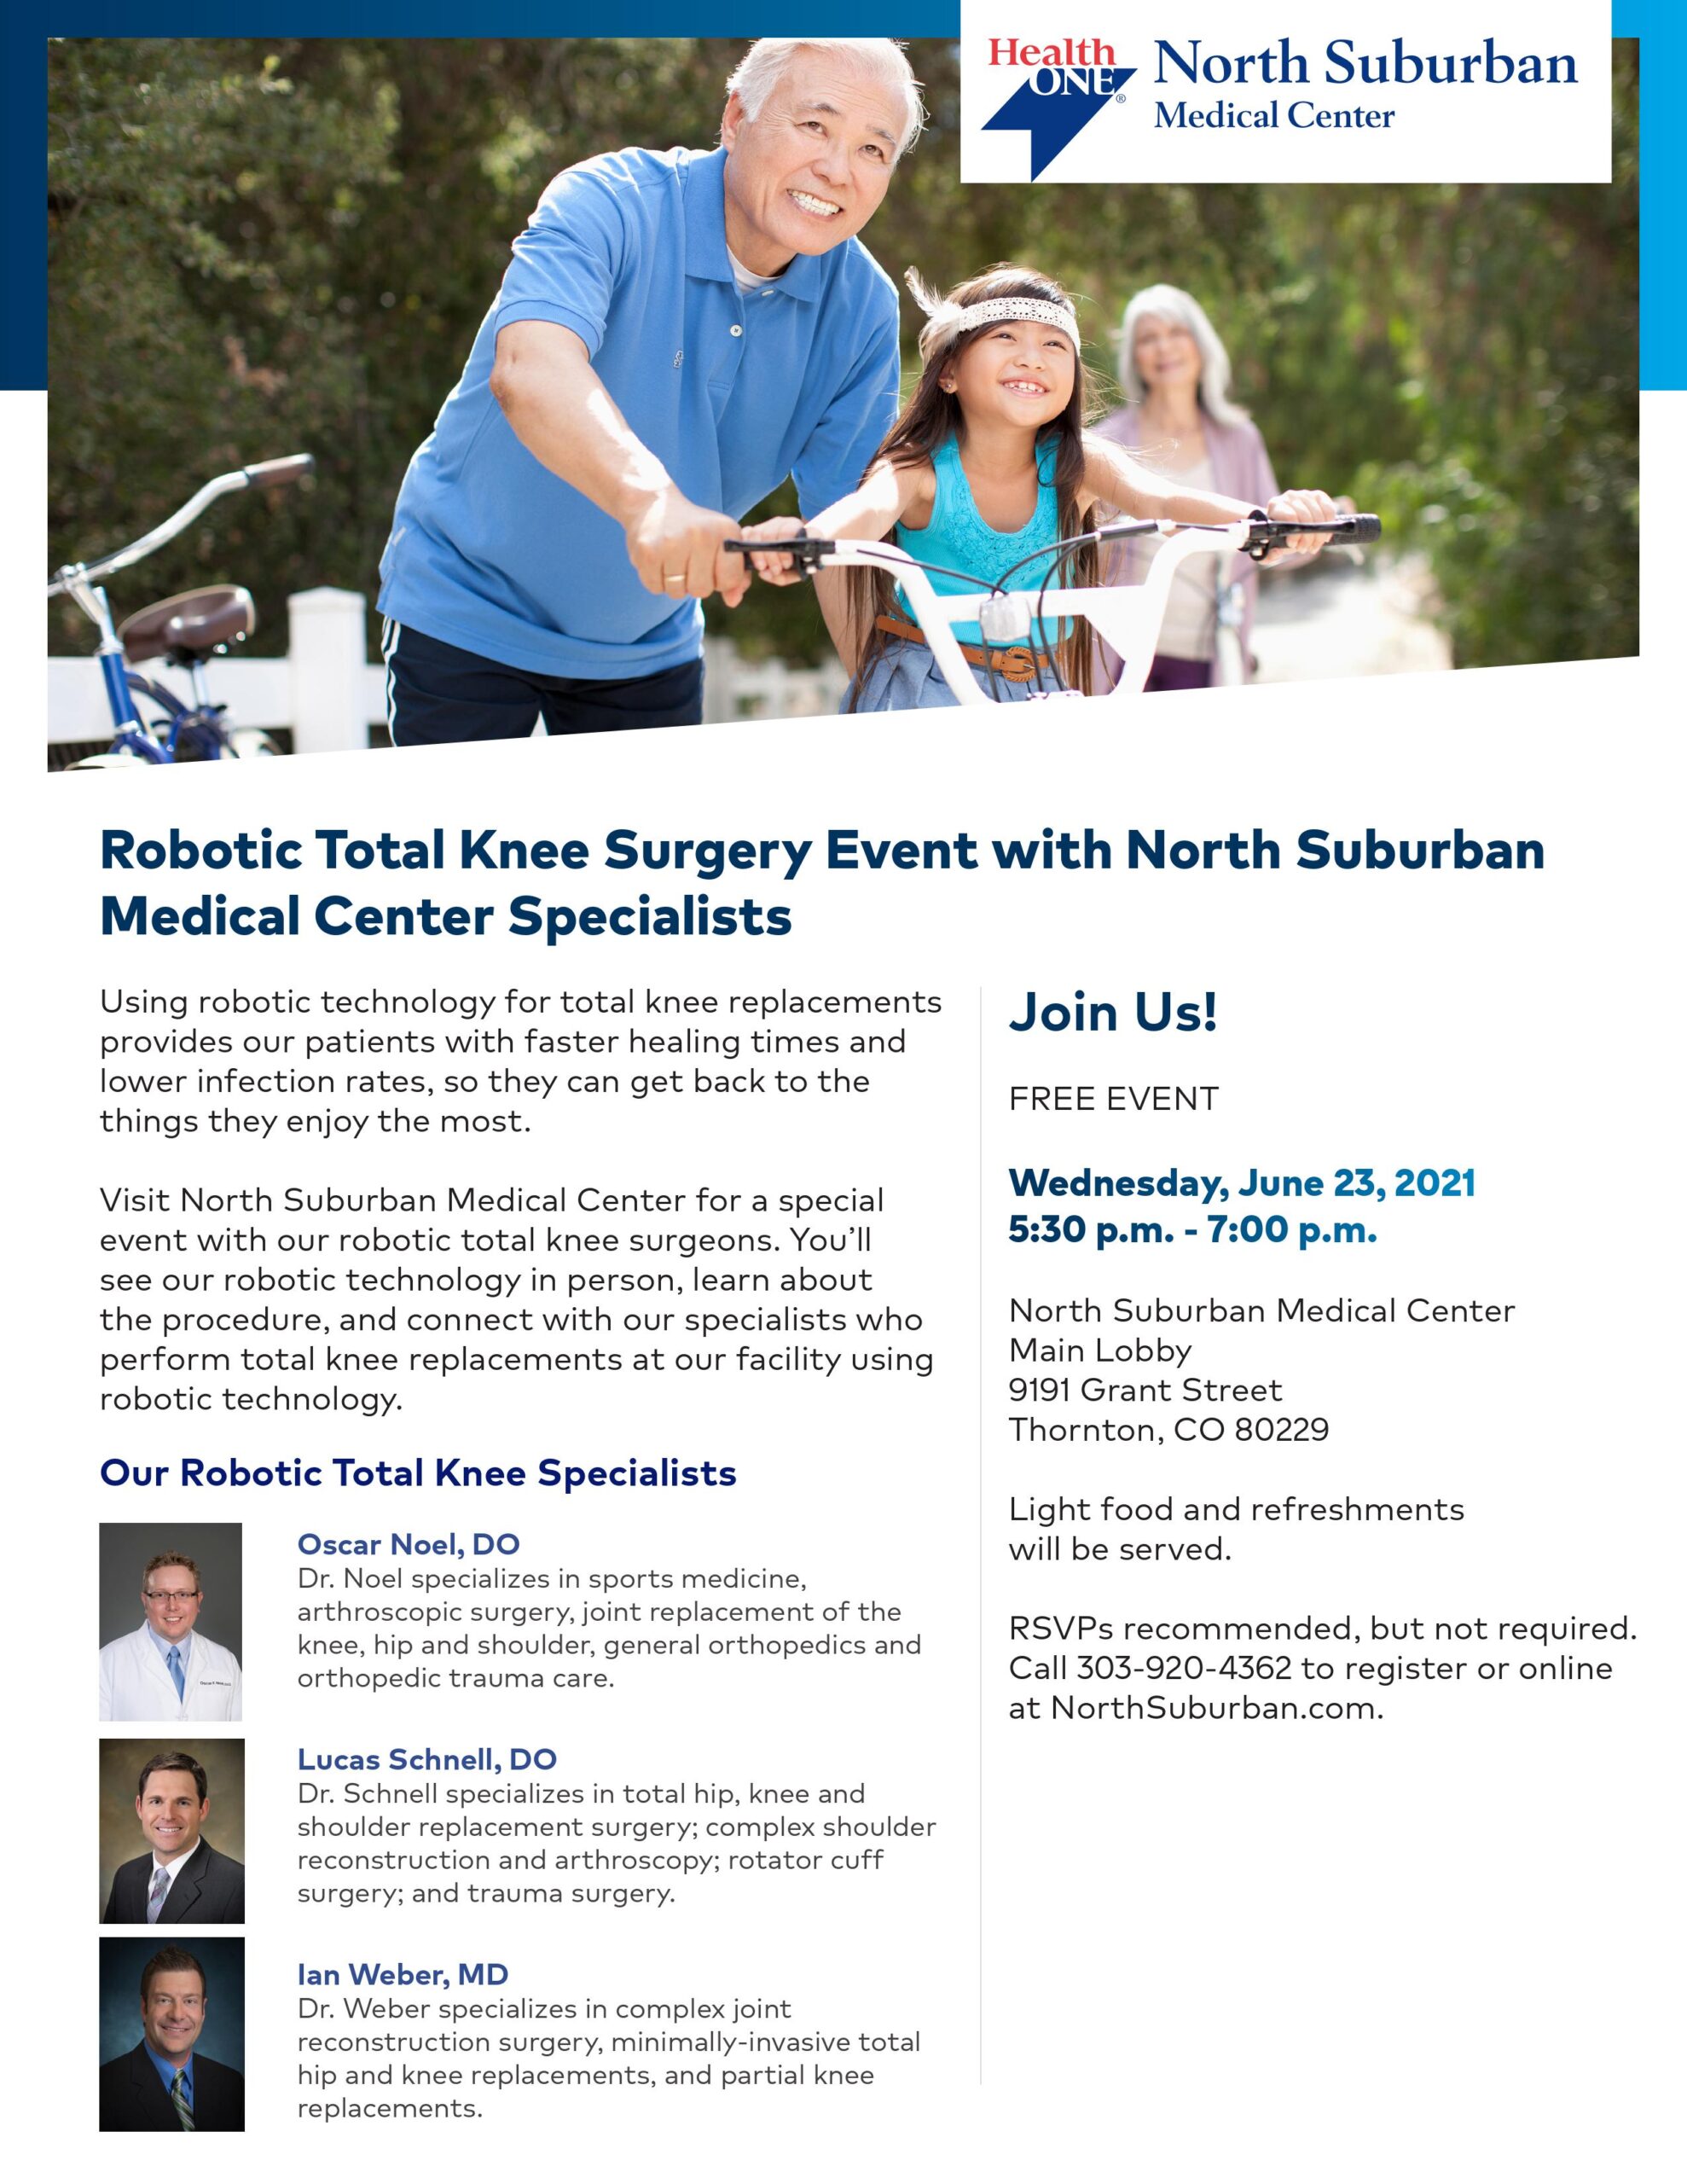 Learn About the Benefits of Robotic Technology for Total Knee Replacement